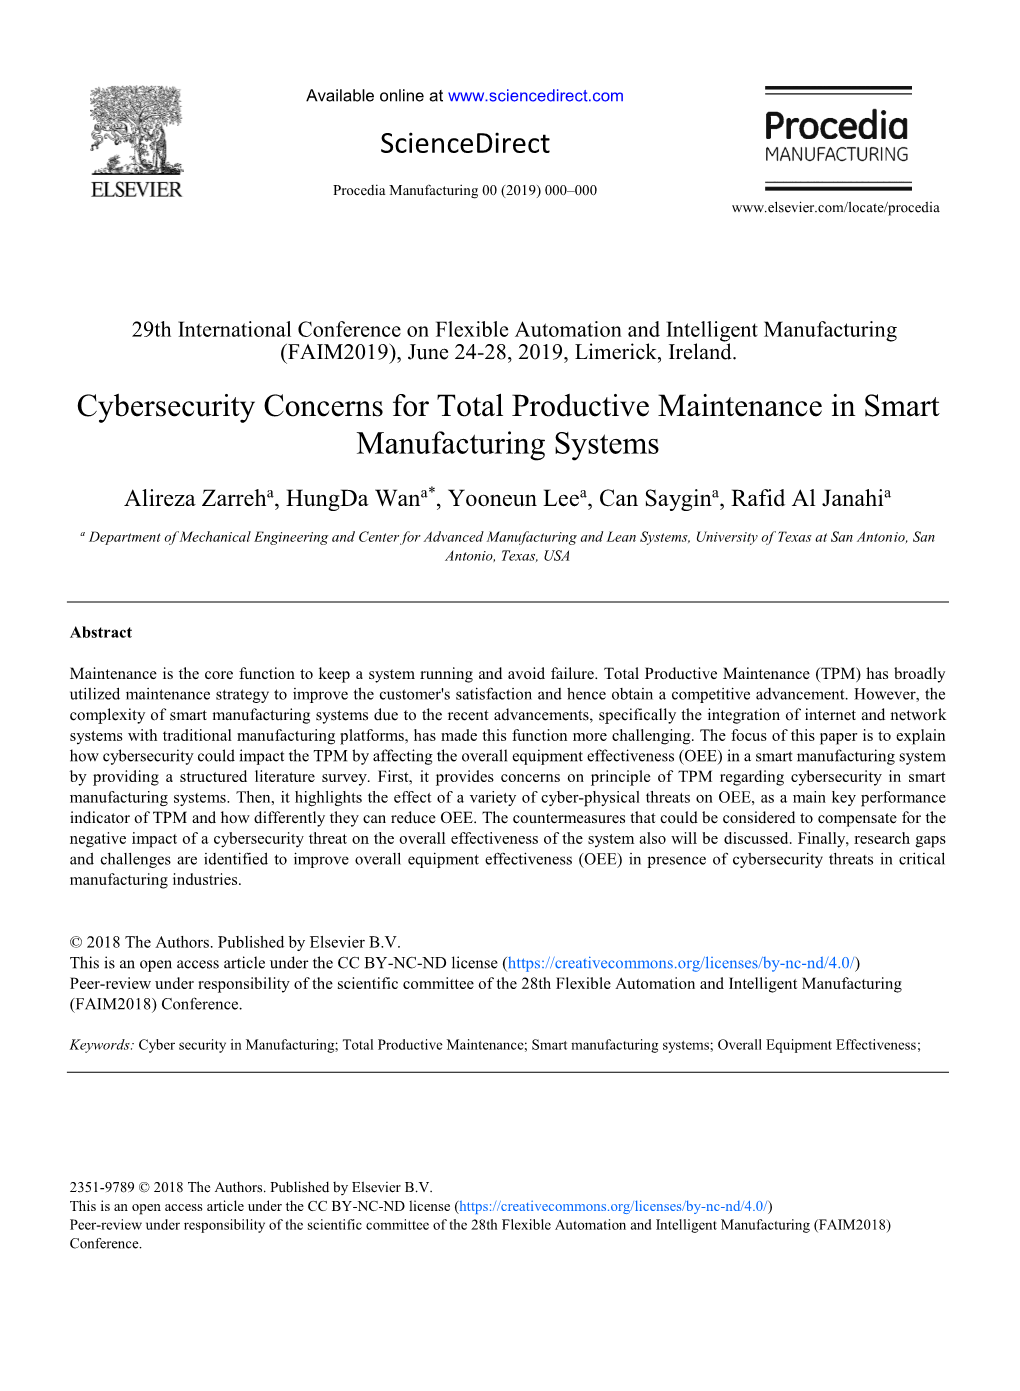 Cybersecurity Concerns for Total Productive Maintenance in Smart Manufacturing Systems